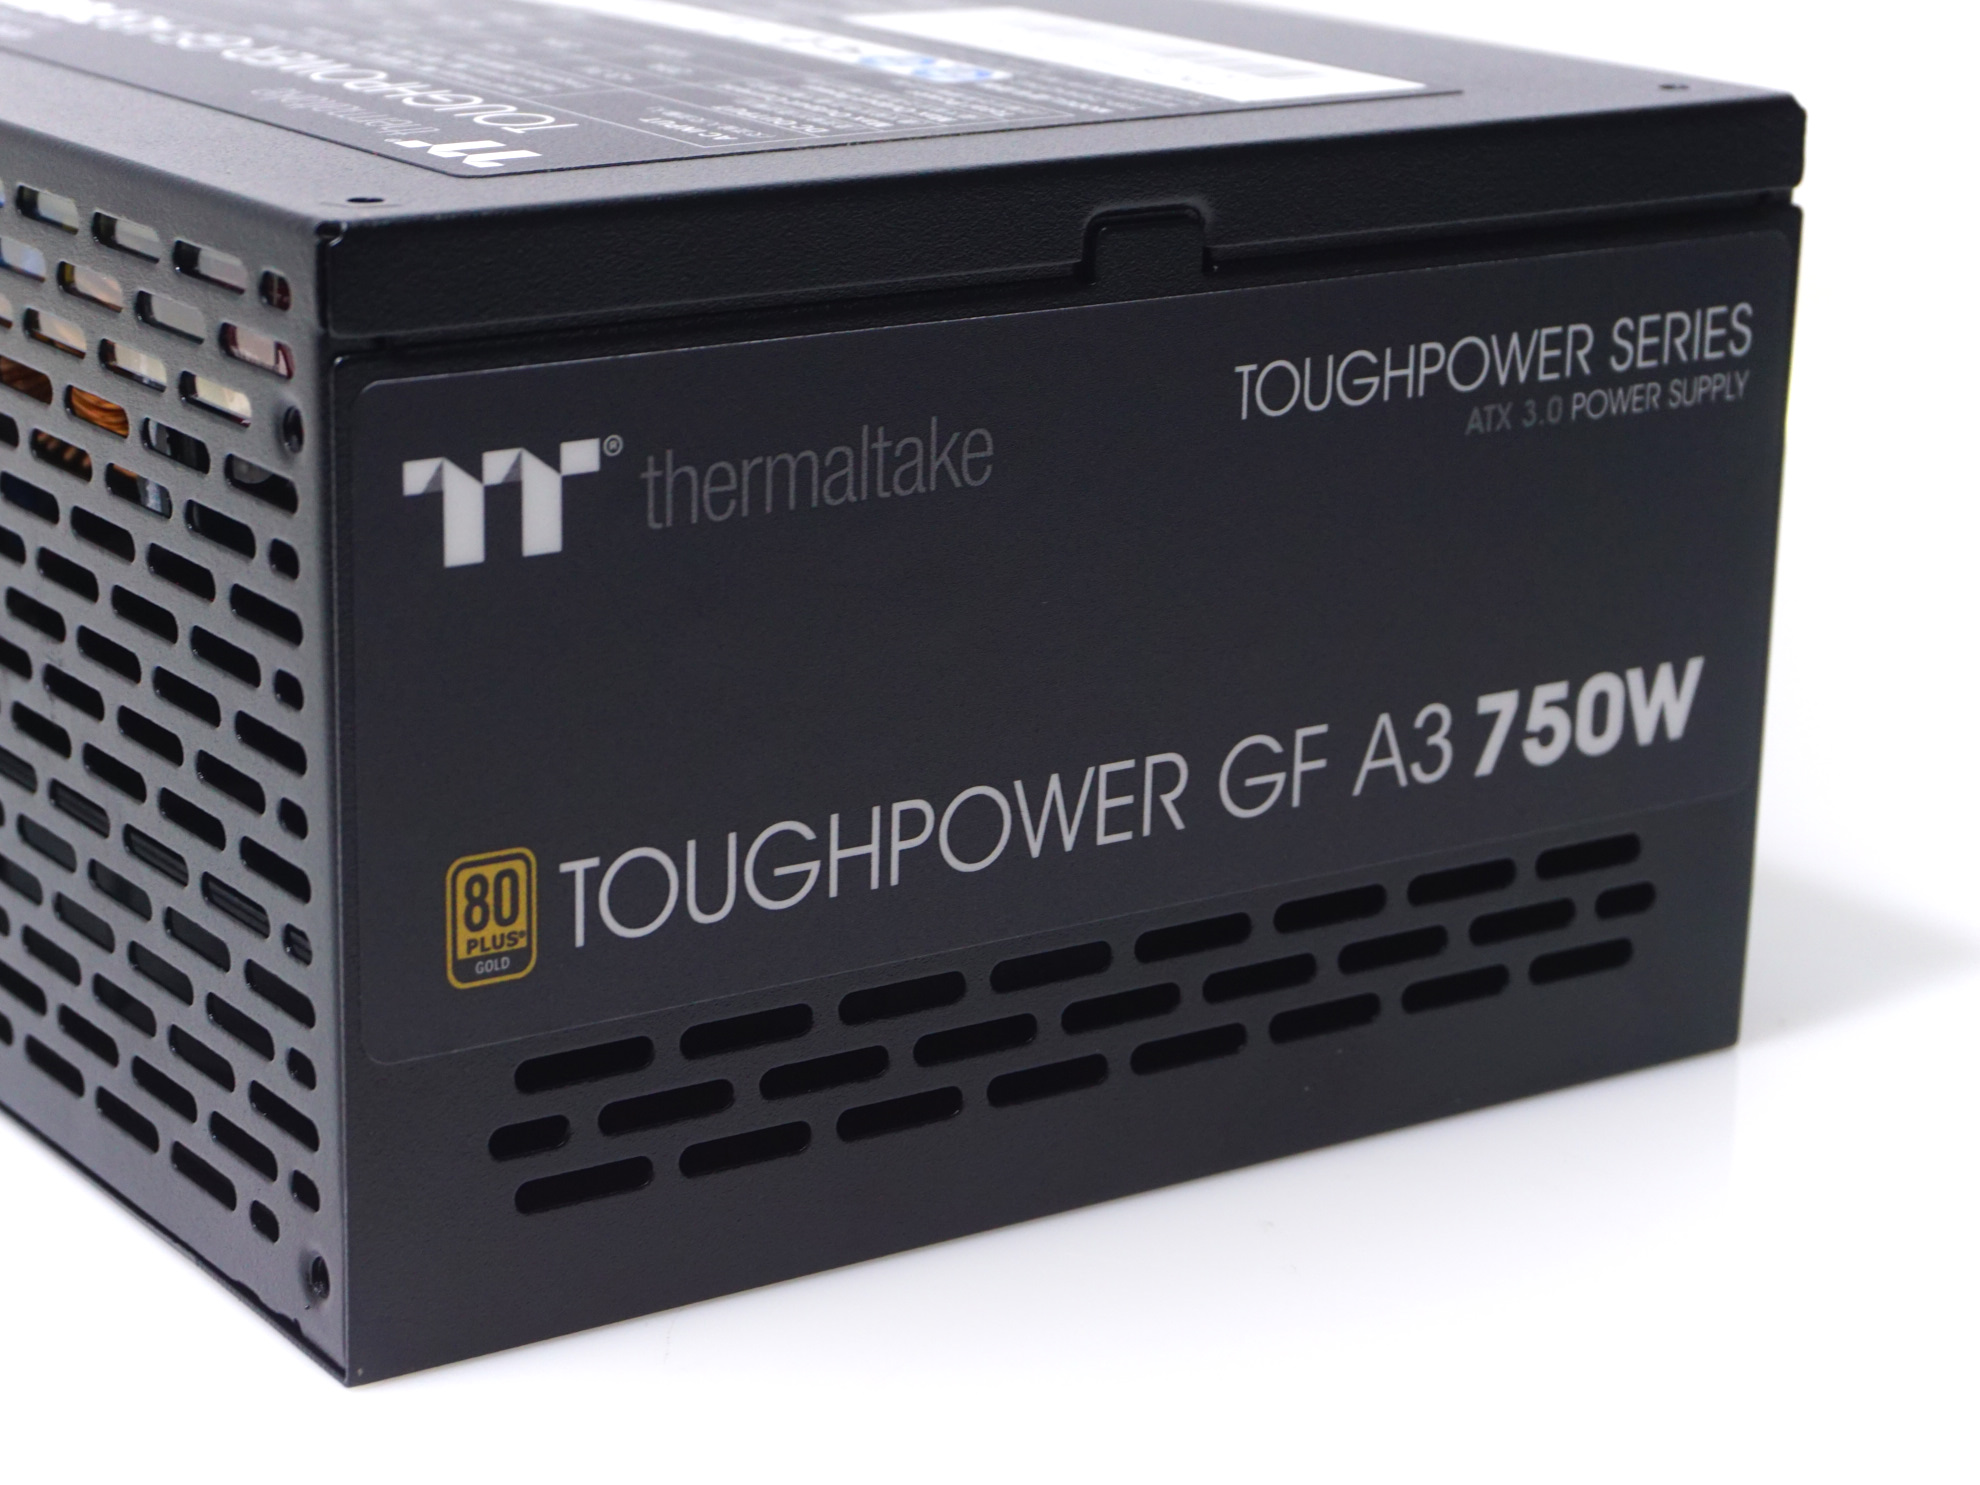 Power Supply Quality & Conclusion - The Thermaltake Toughpower GF